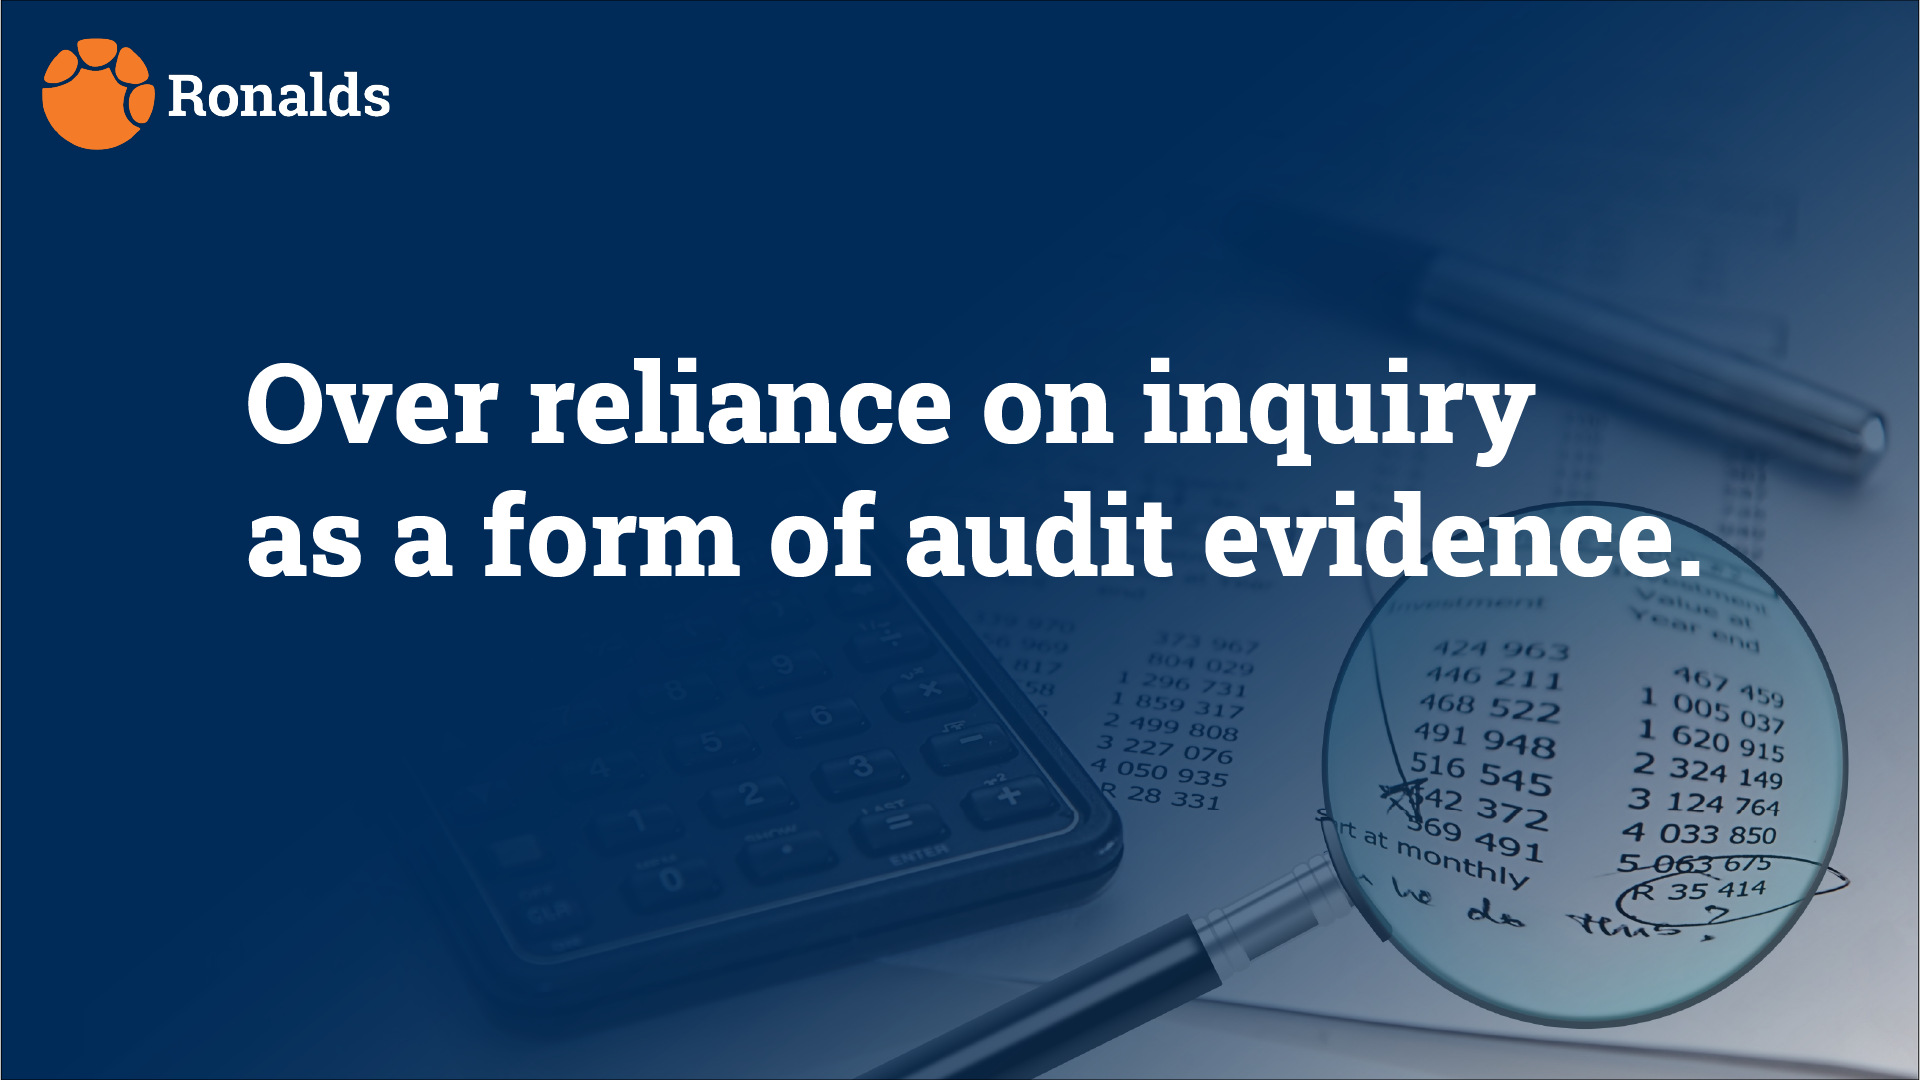 THE MAJOR PROBLEM FACING FINANCIAL AUDIT & THE REMEDIES TO THE SAME